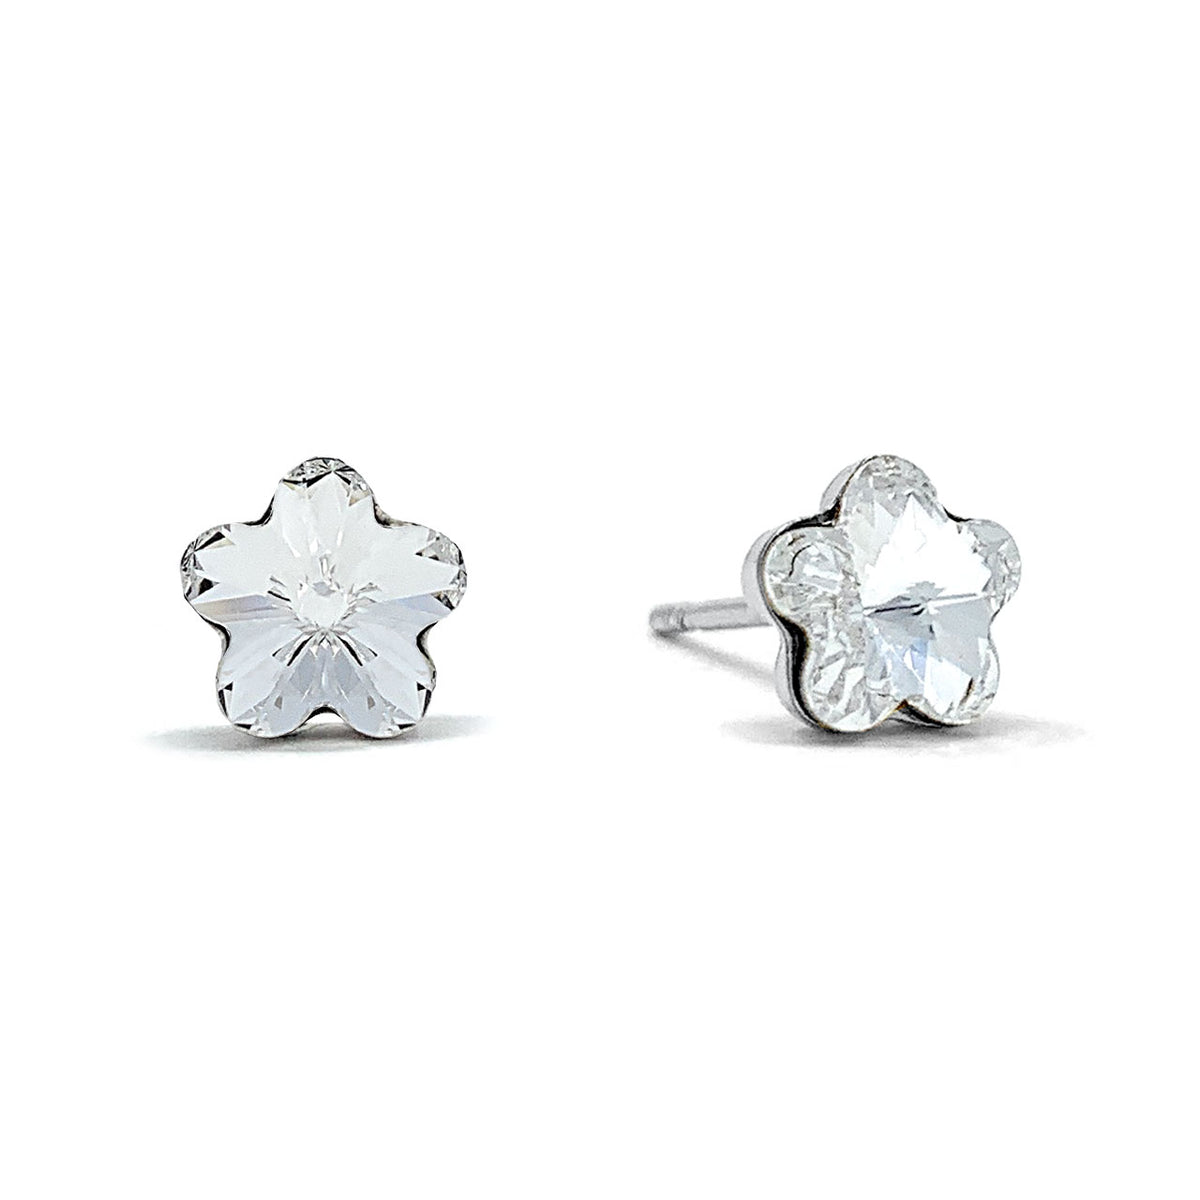 Anna Small Stud Earrings with White Clear Flower Crystals from Swarovski Silver Toned Rhodium Plated - Ed Heart